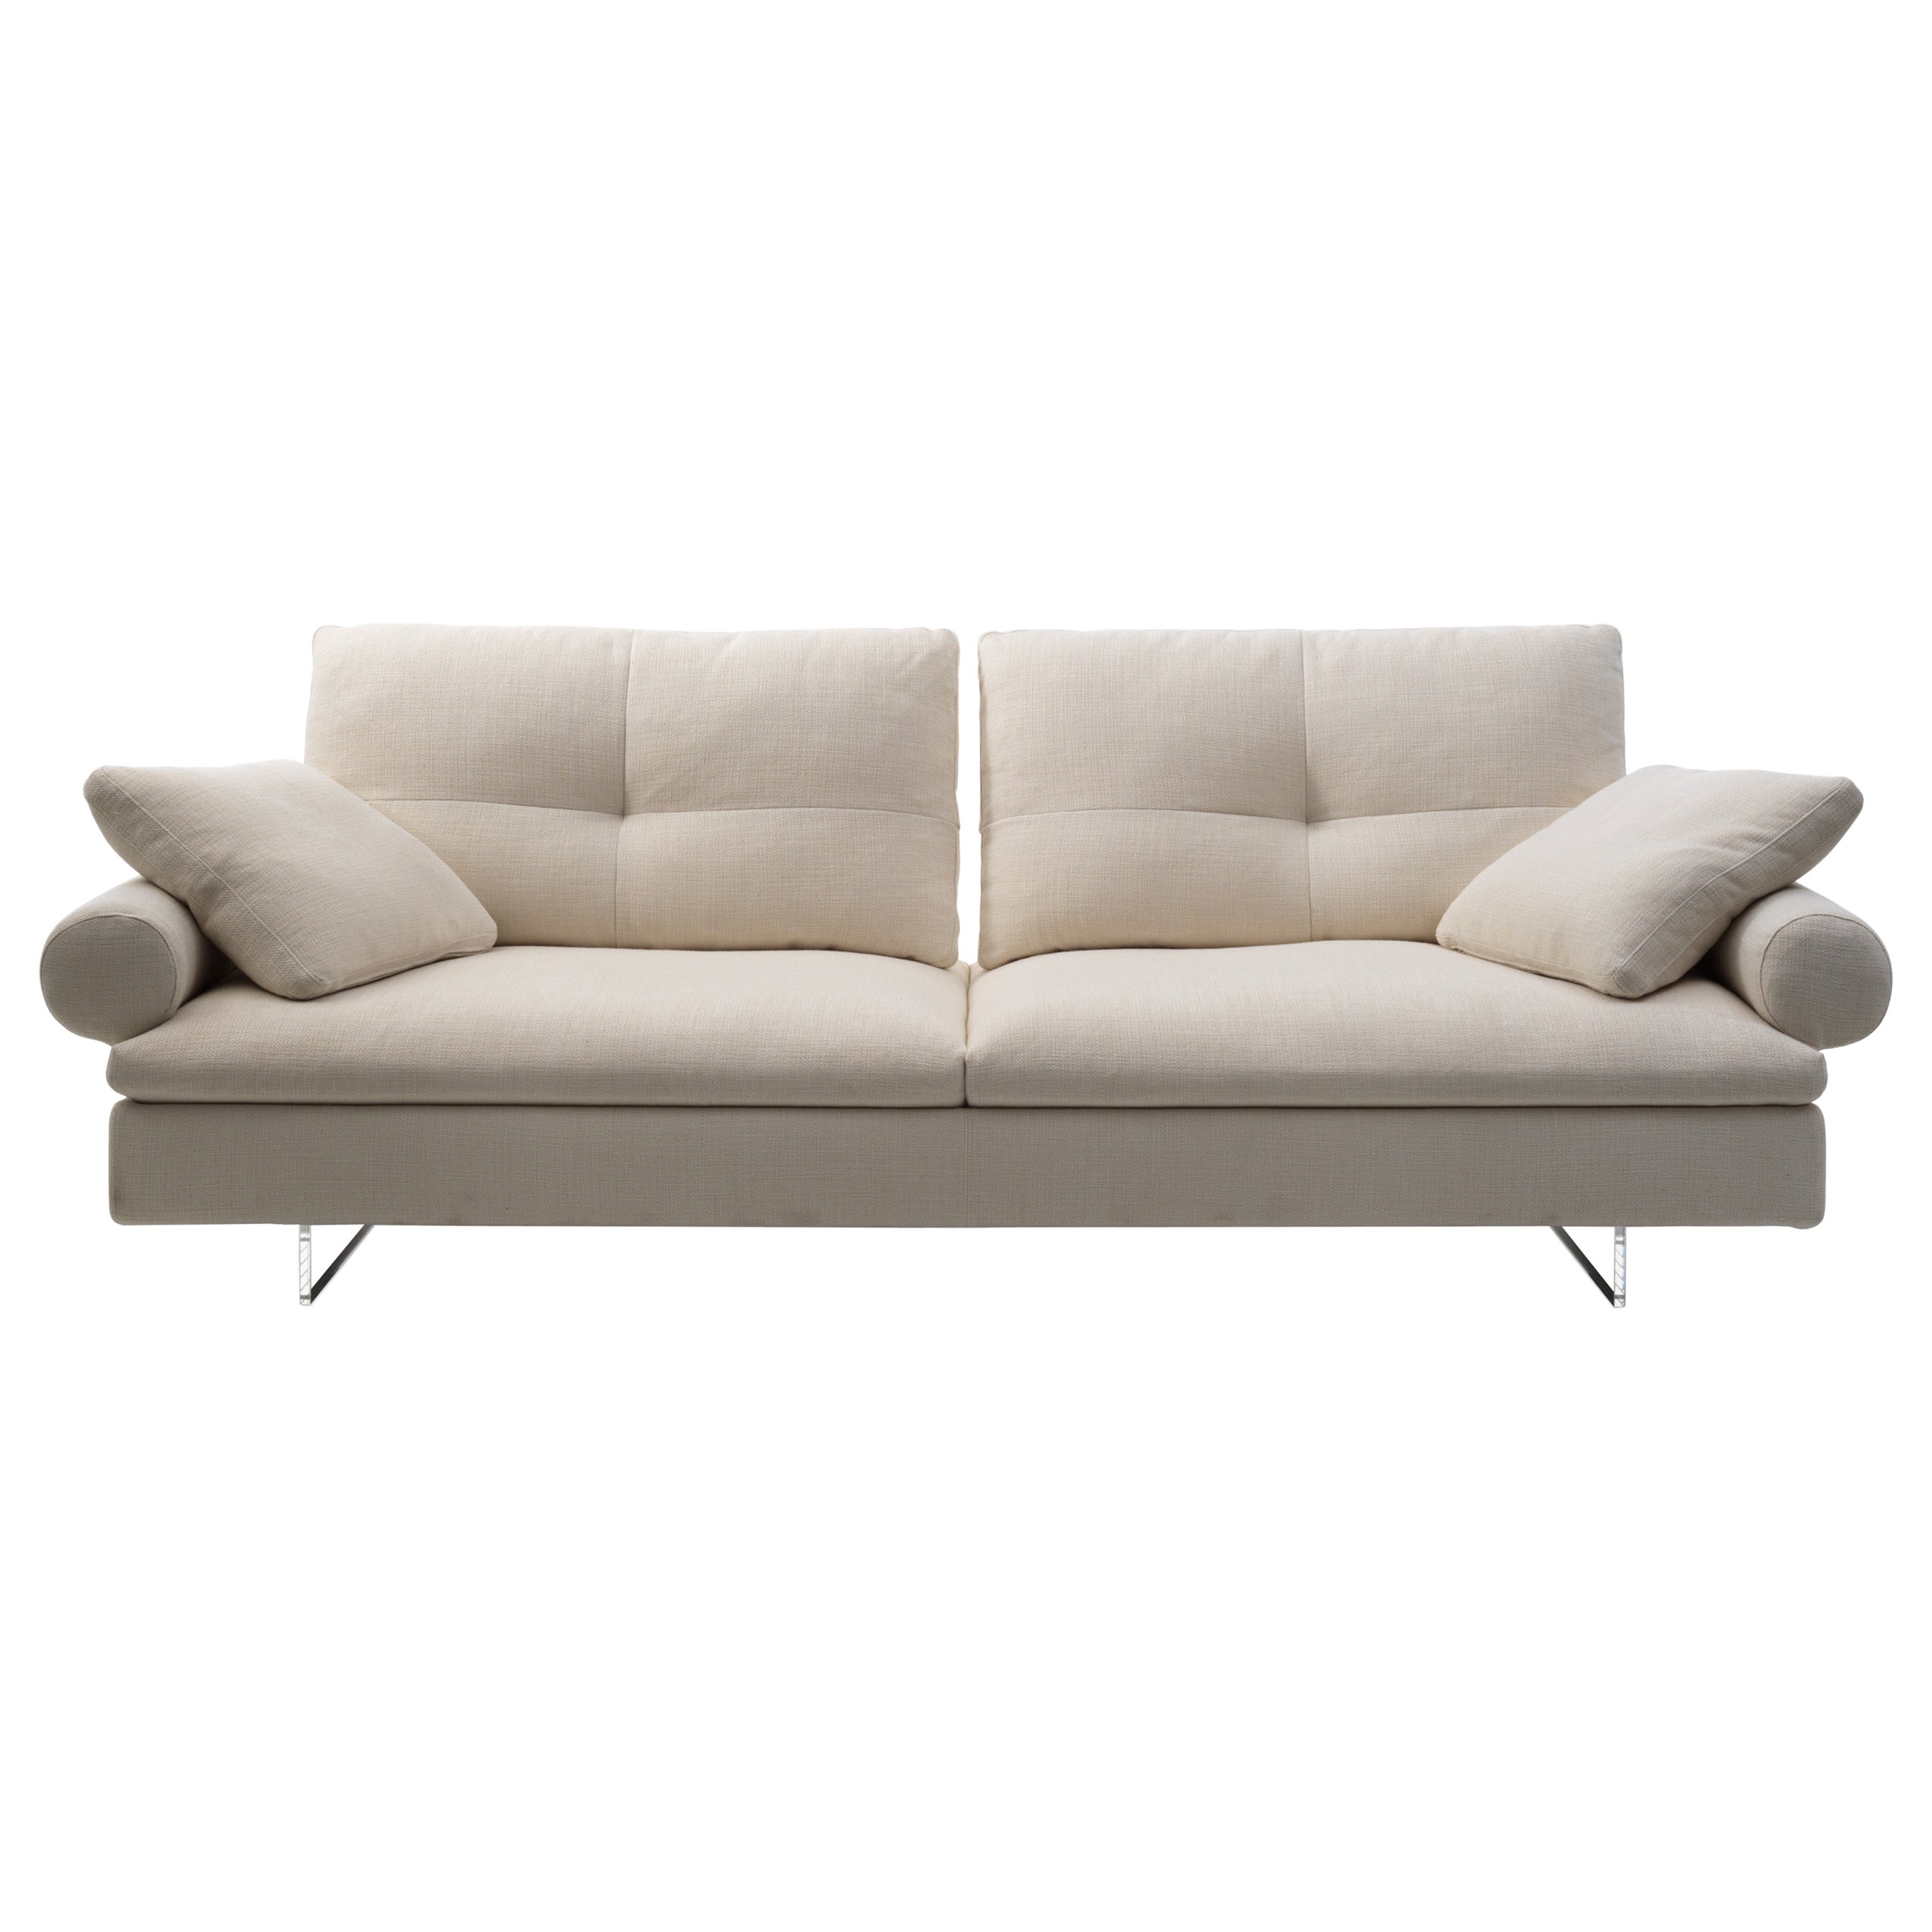 Limes New 88 Small Sofa in Beige Upholstery with Roll Armrest by Sergio Bicego For Sale